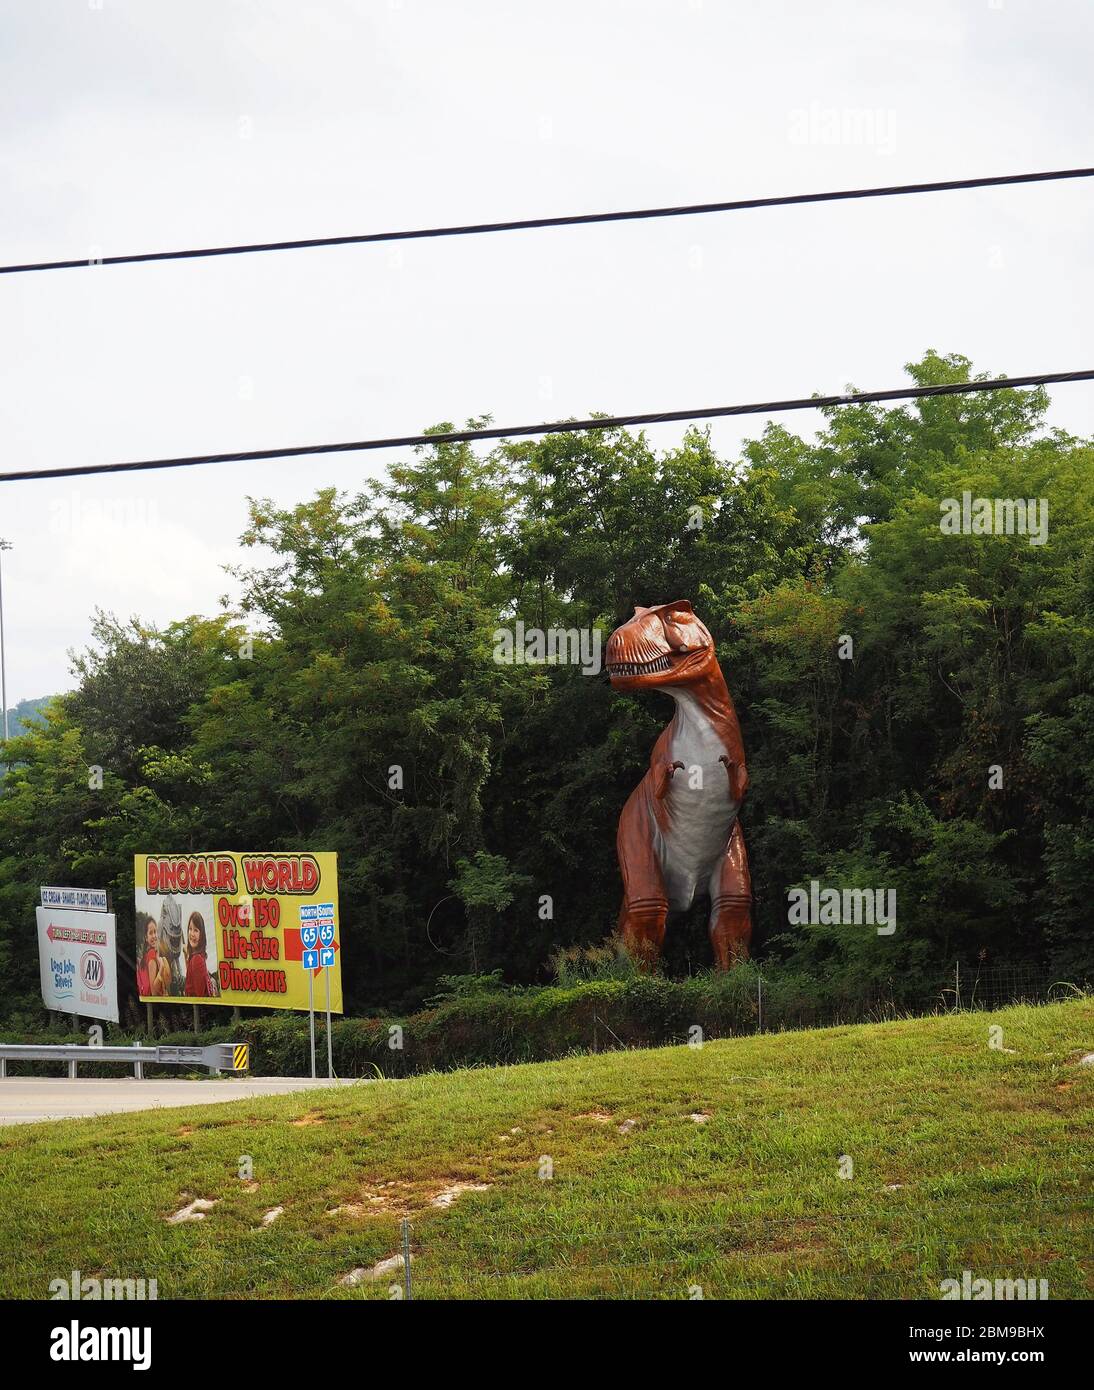 CAVE CITY, KENTUCKY - JULY 21, 2019: A large dinosaur sculpture peers out from the woods next to the highway near a sign adverstising the Dinosaur Wor Stock Photo